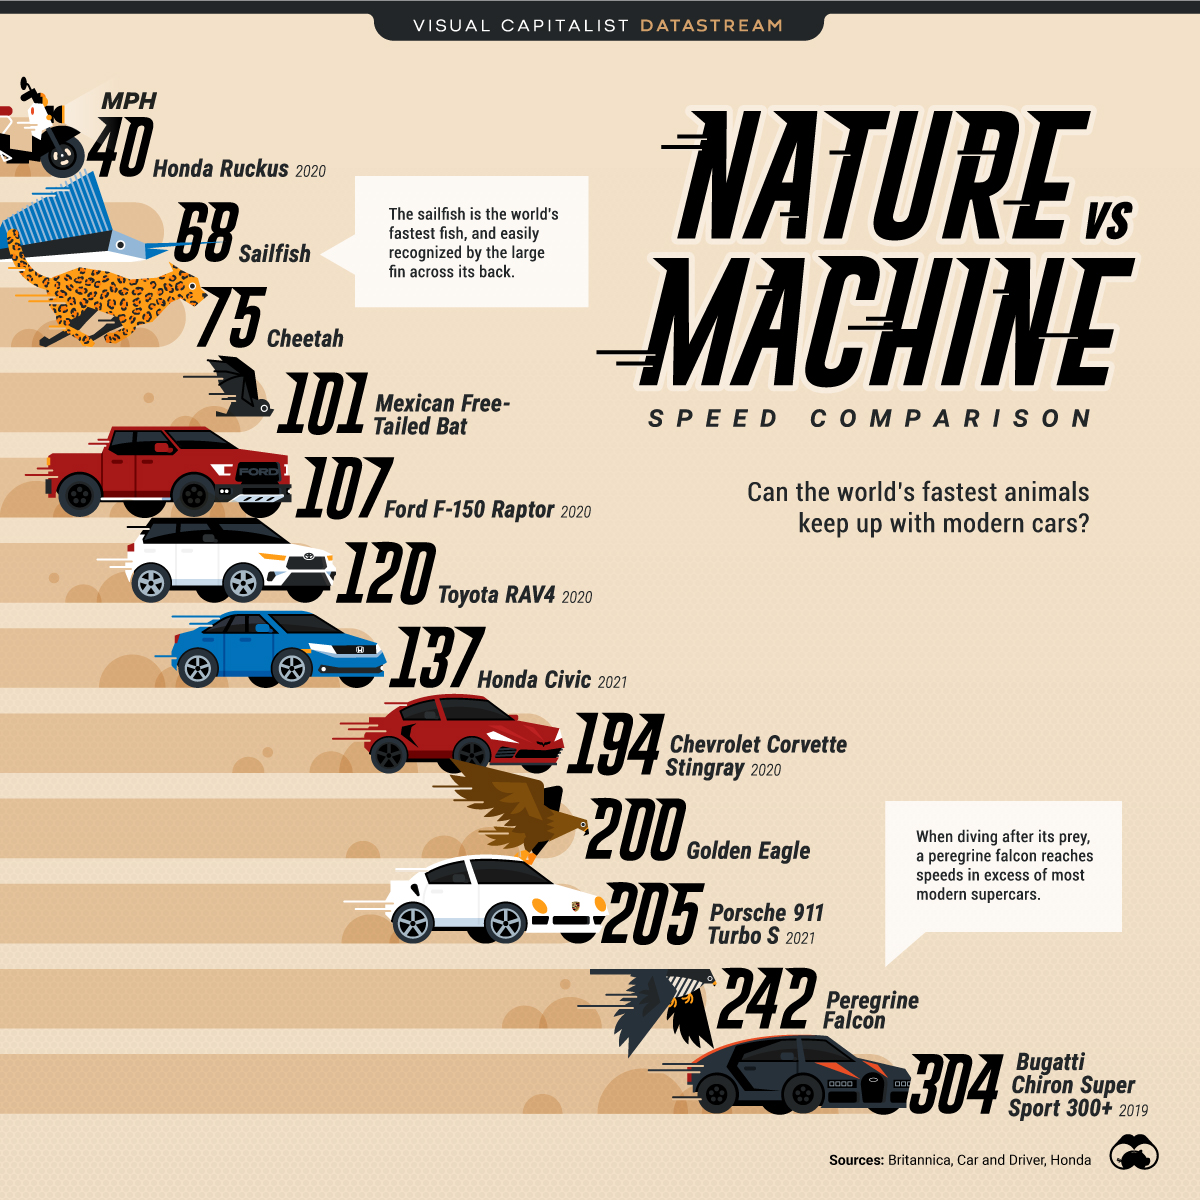 What's Faster, Nature or Machine?